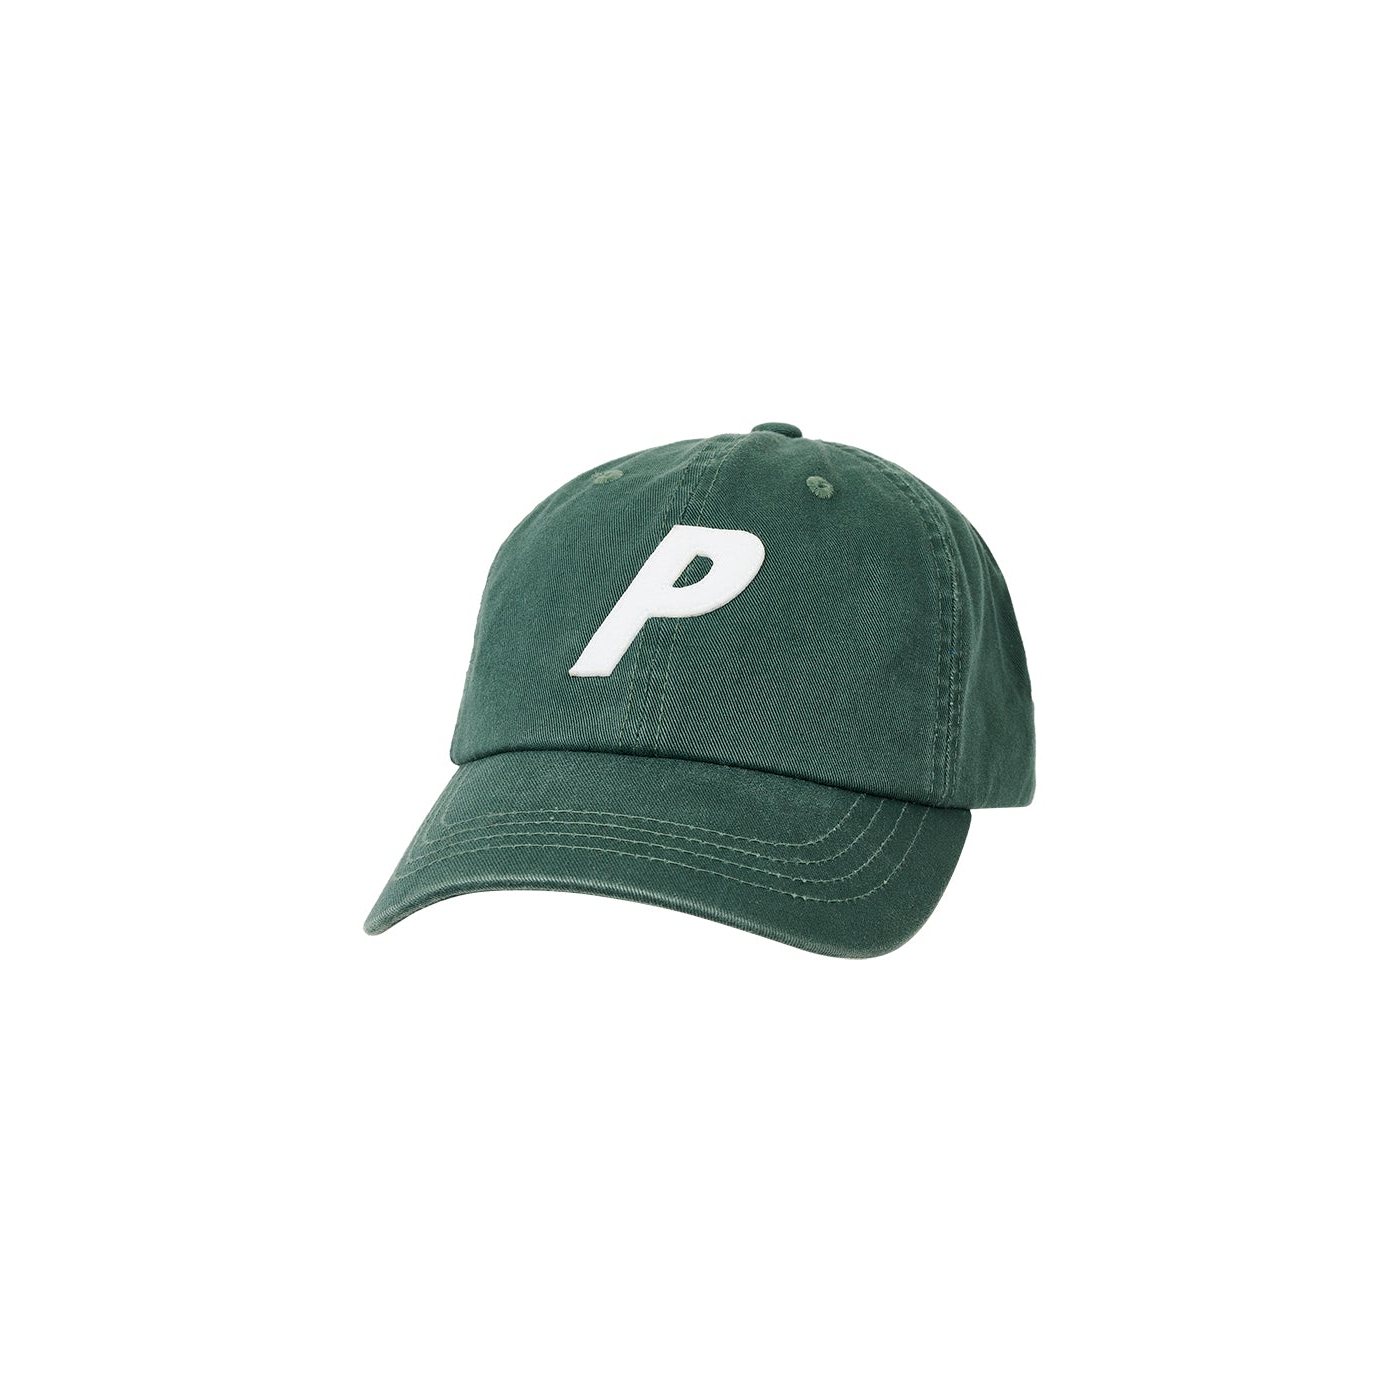 Thumbnail P 6-PANEL GREEN one color